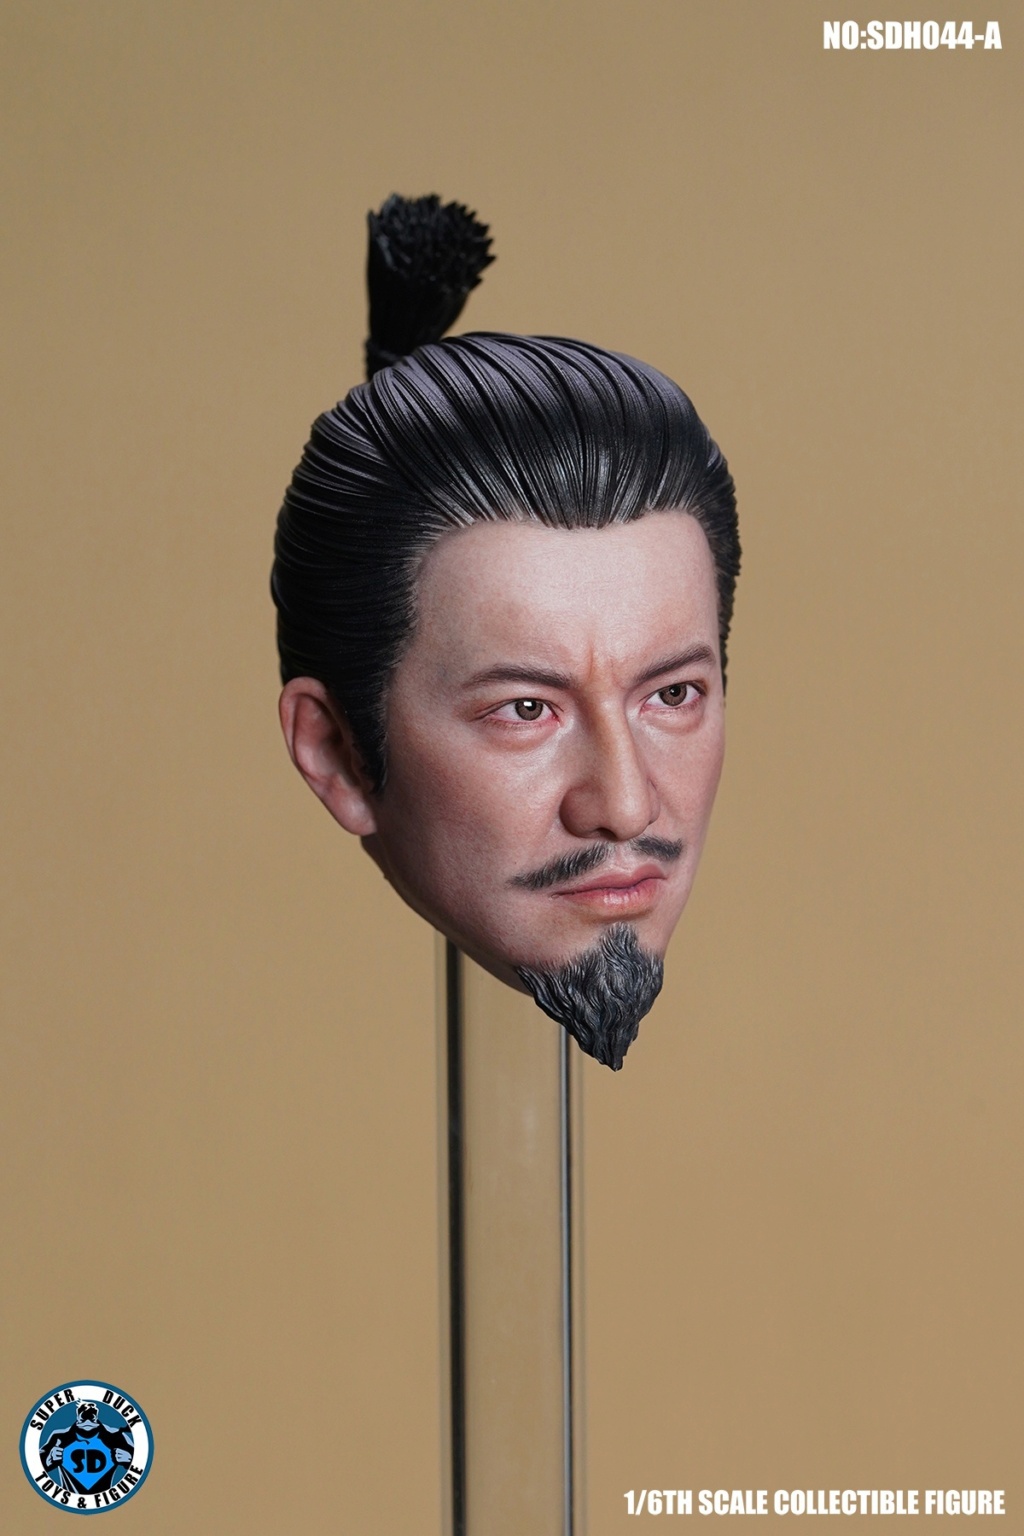 NEW PRODUCT: Super Duck: 1/6 Japanese samurai head carving (SDH044-A version without neck, SDH044-B version with neck) 21225012